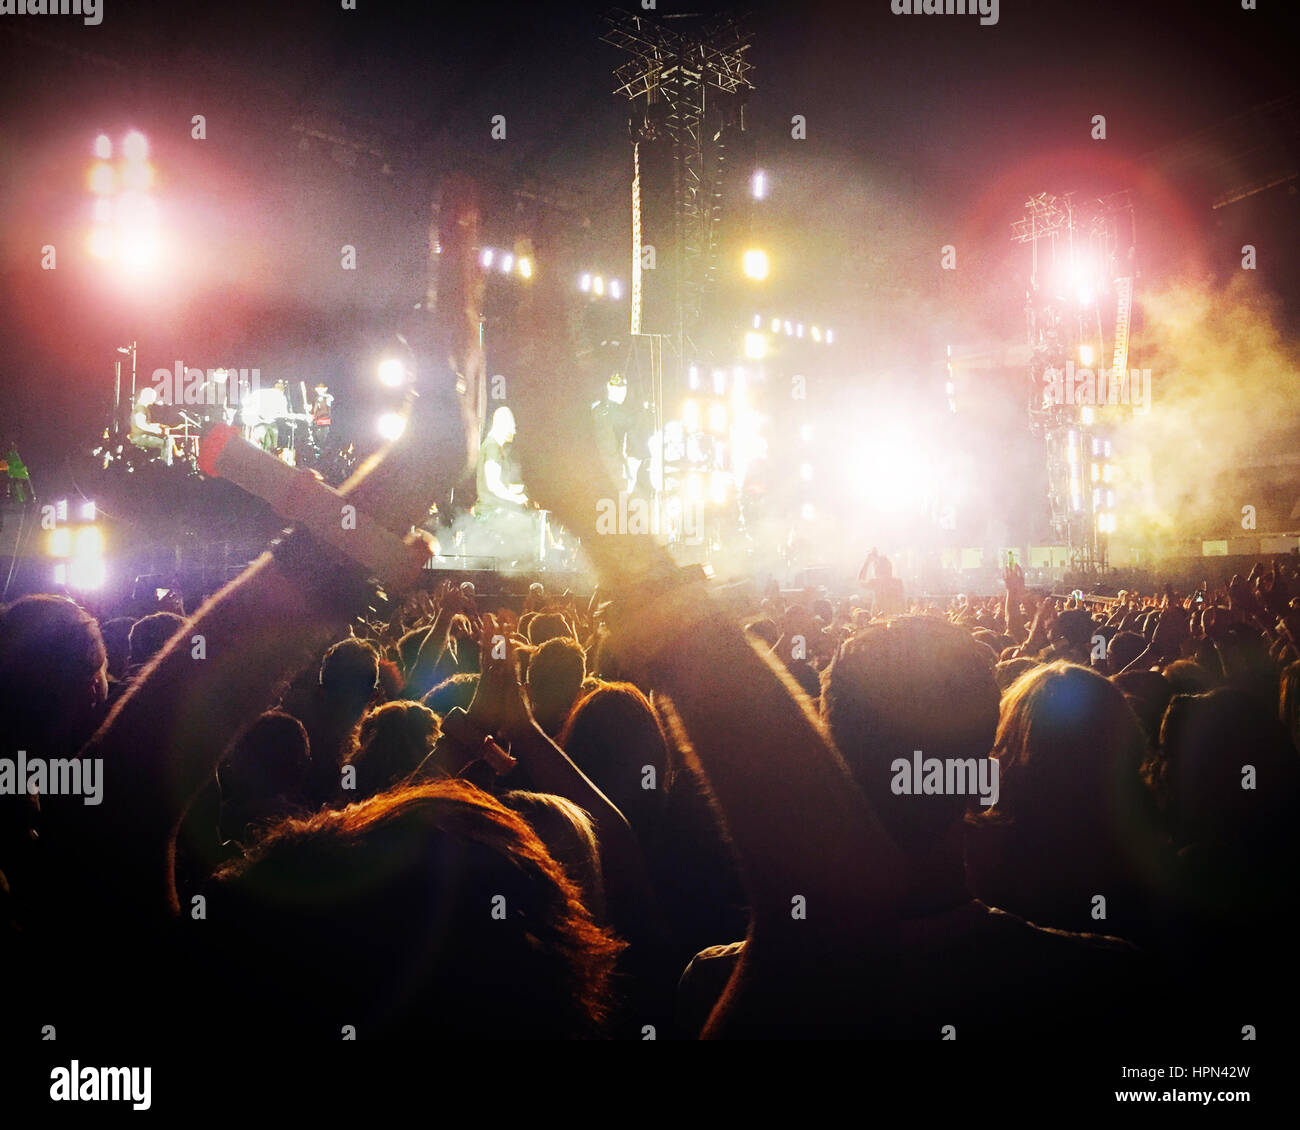 Large crowd at a concert. It is dark and there are colourful lights. Stock Photo